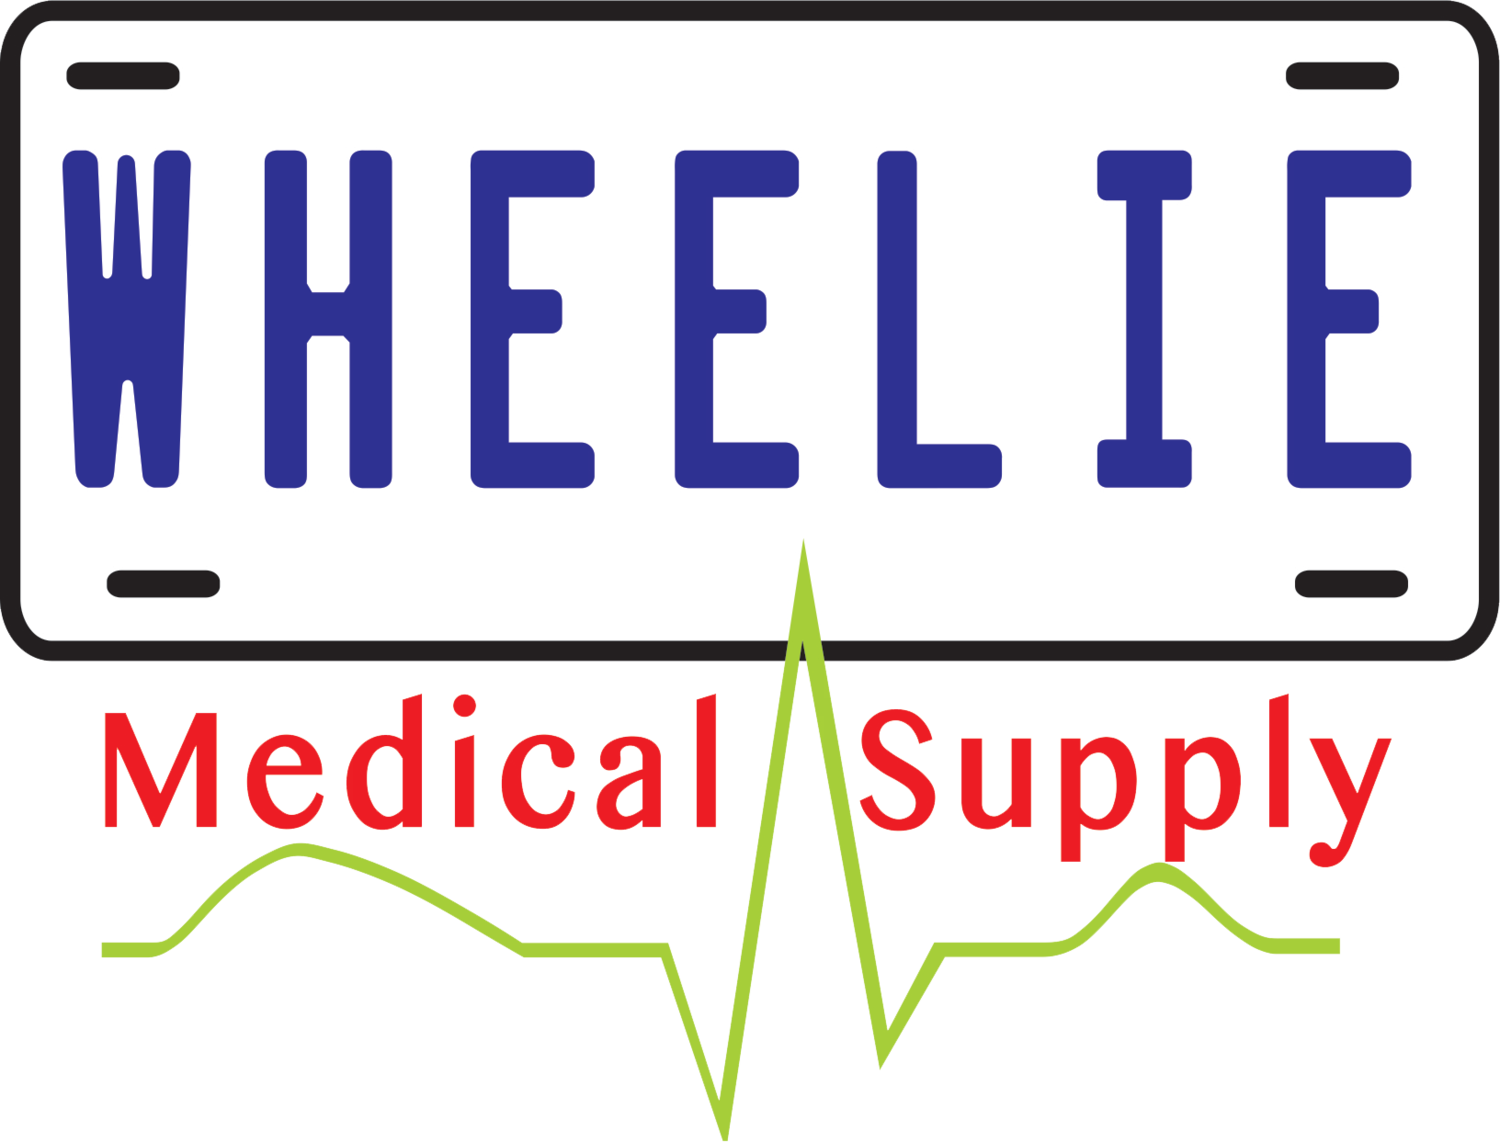 Specializing in urological supplies